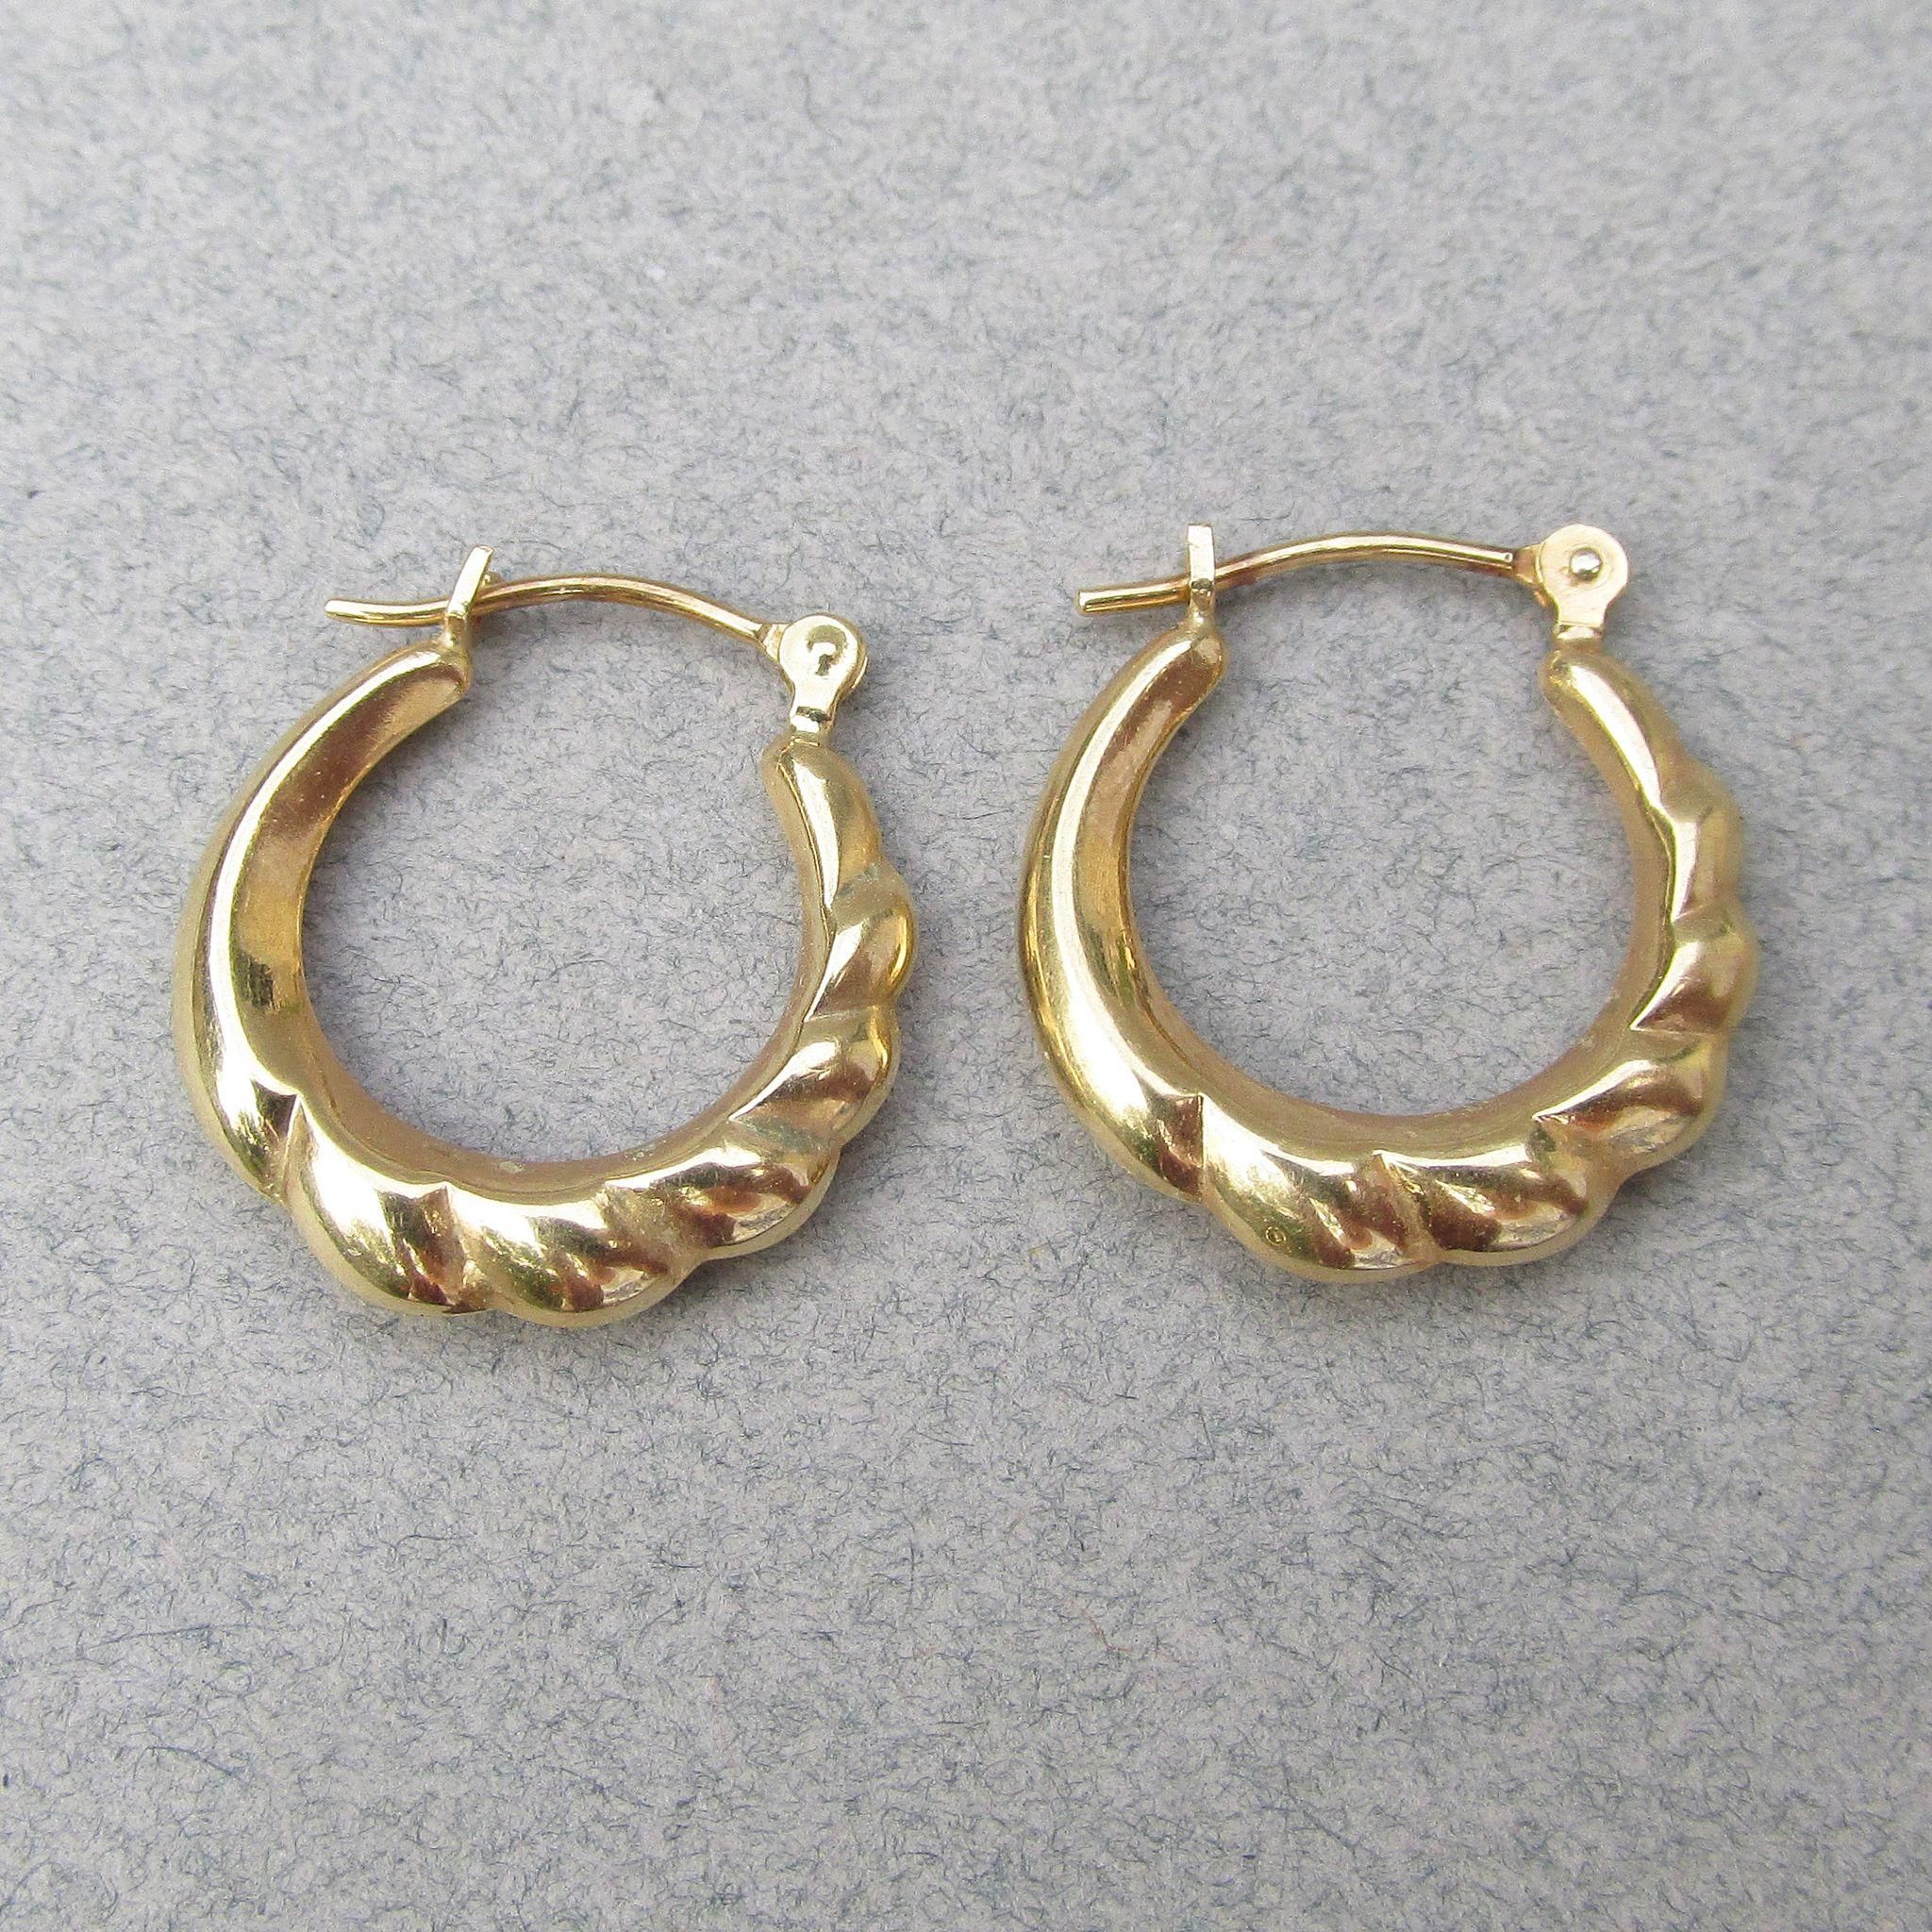 Vintage Classic Small Ribbed Solid 14k Yellow Gold Hoop Earrings